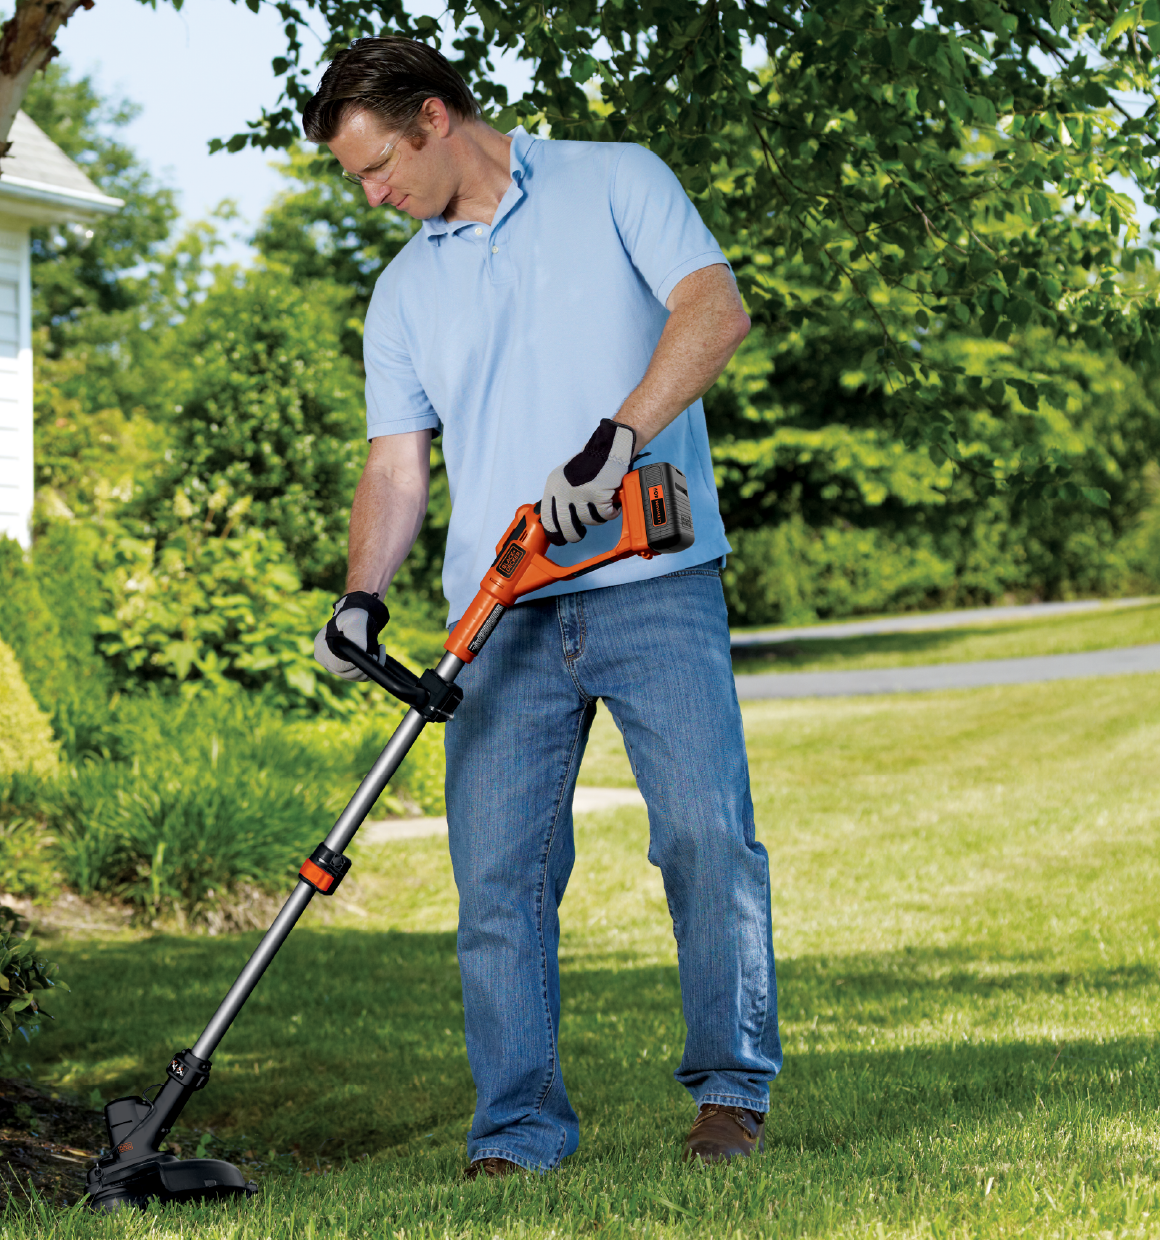 black decker LST136 36v lithium high performance string trimmer with power  command